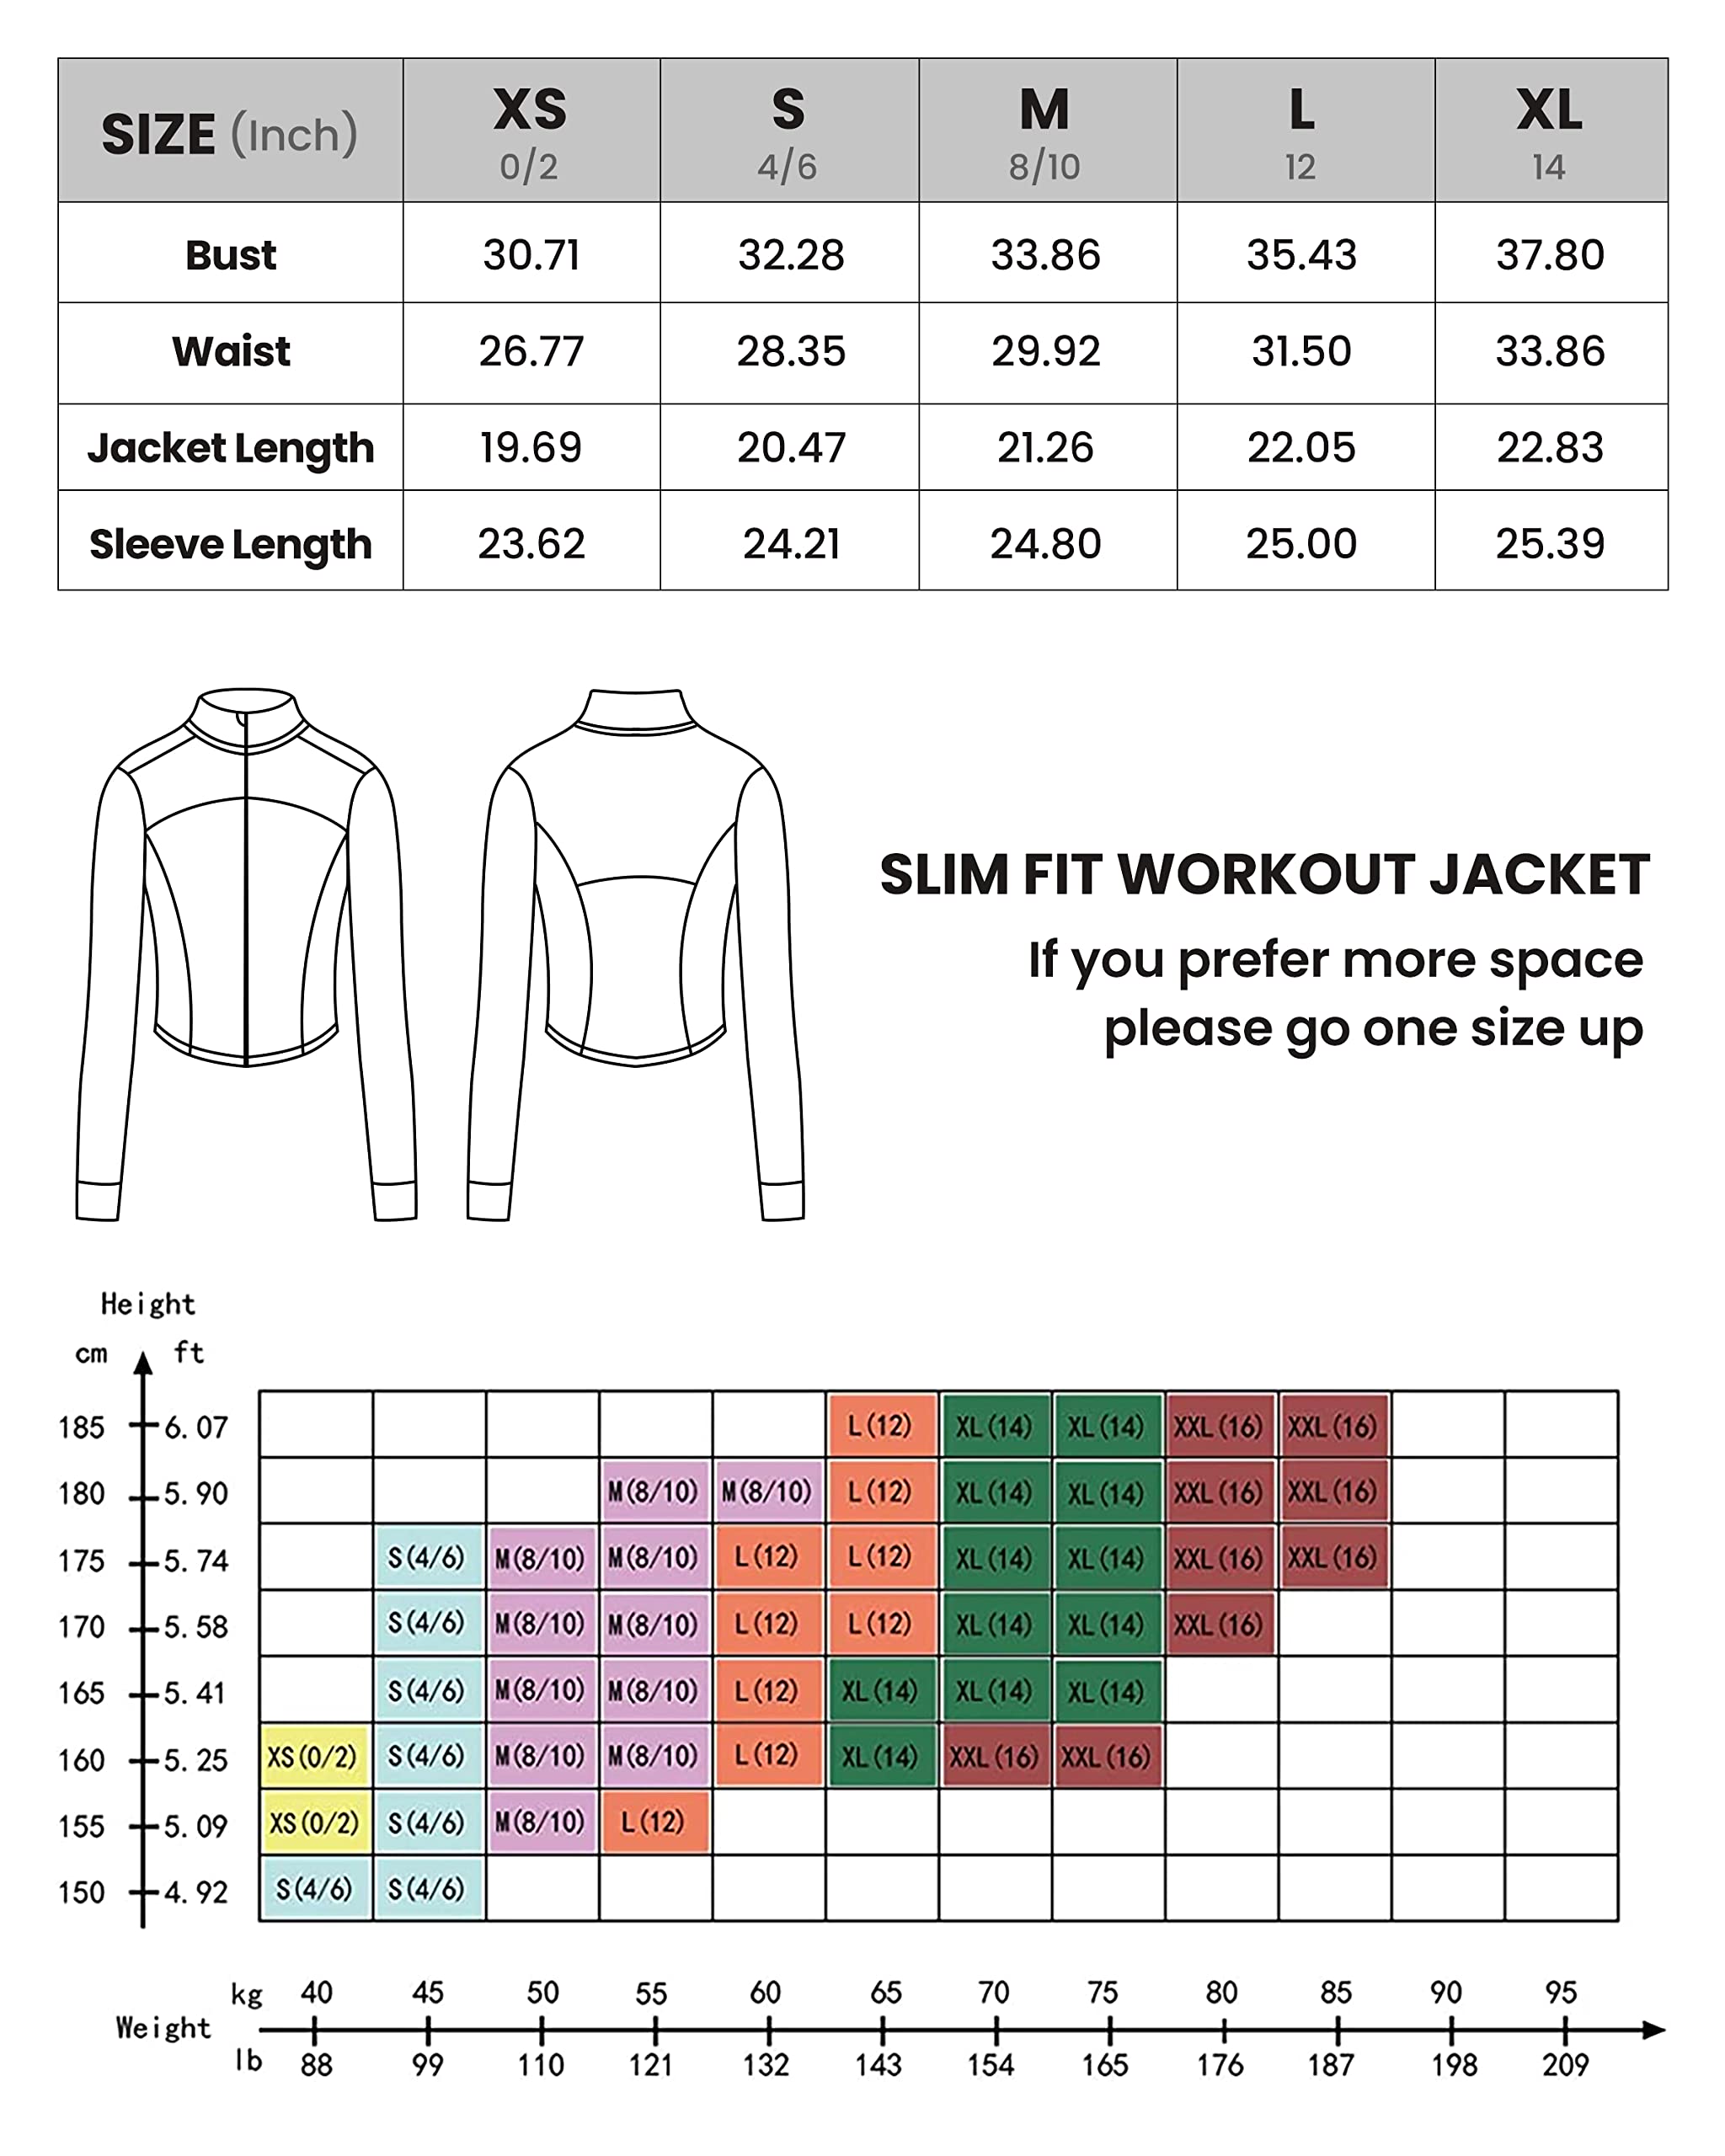 GYM RAINBOW Womens Zip Up Workout Jakcets Lightweight Slim Fit Running Athletic Jackets with Thumb Holes